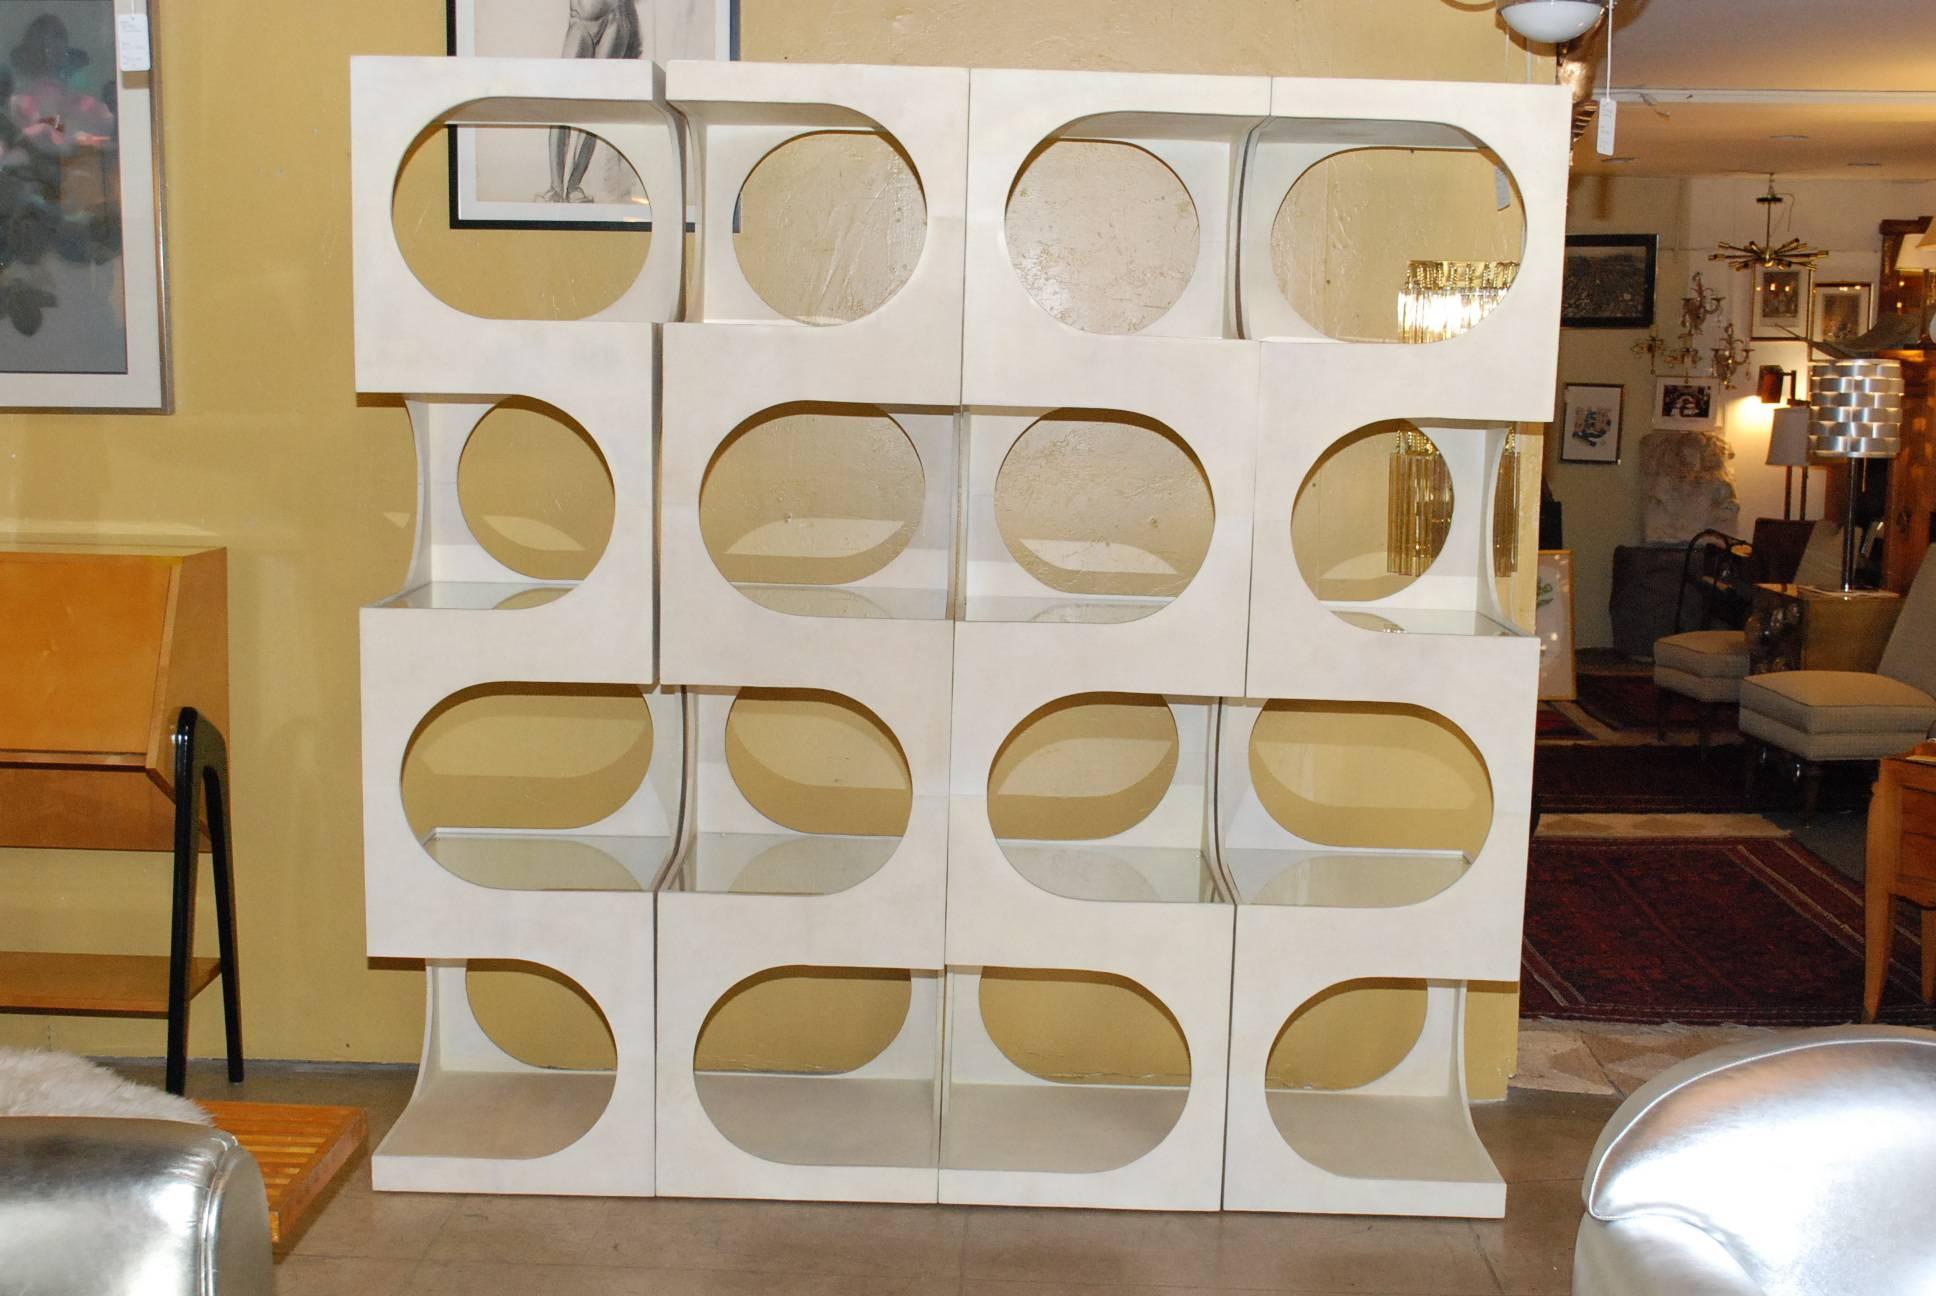 Elegant Retro style ètagerè or room divider. This is four single unit cover all around of parchment and each Unit has four glass shelves.
Dimension: H 79